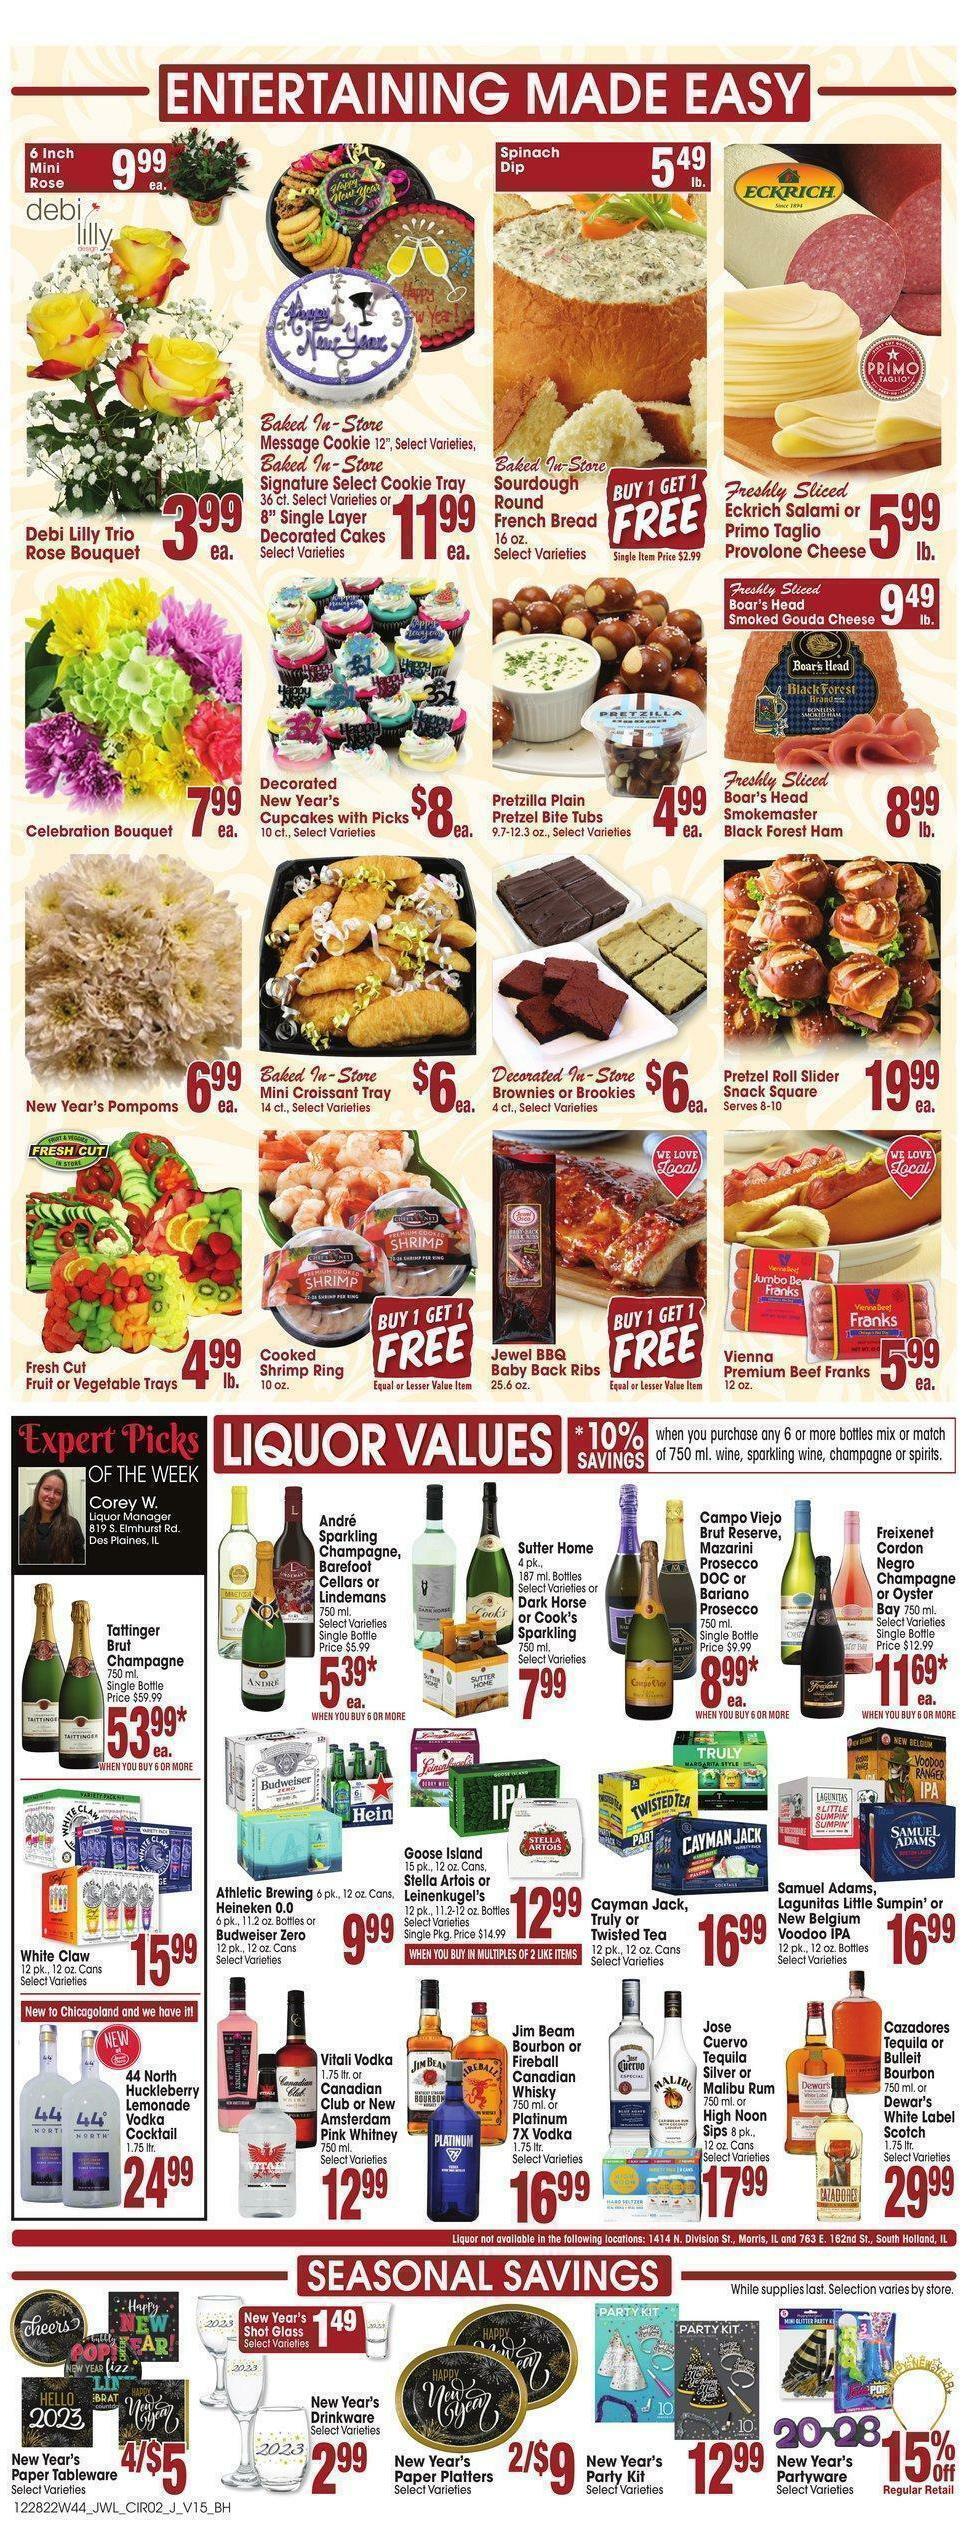 Jewel Osco Weekly Ad from December 28